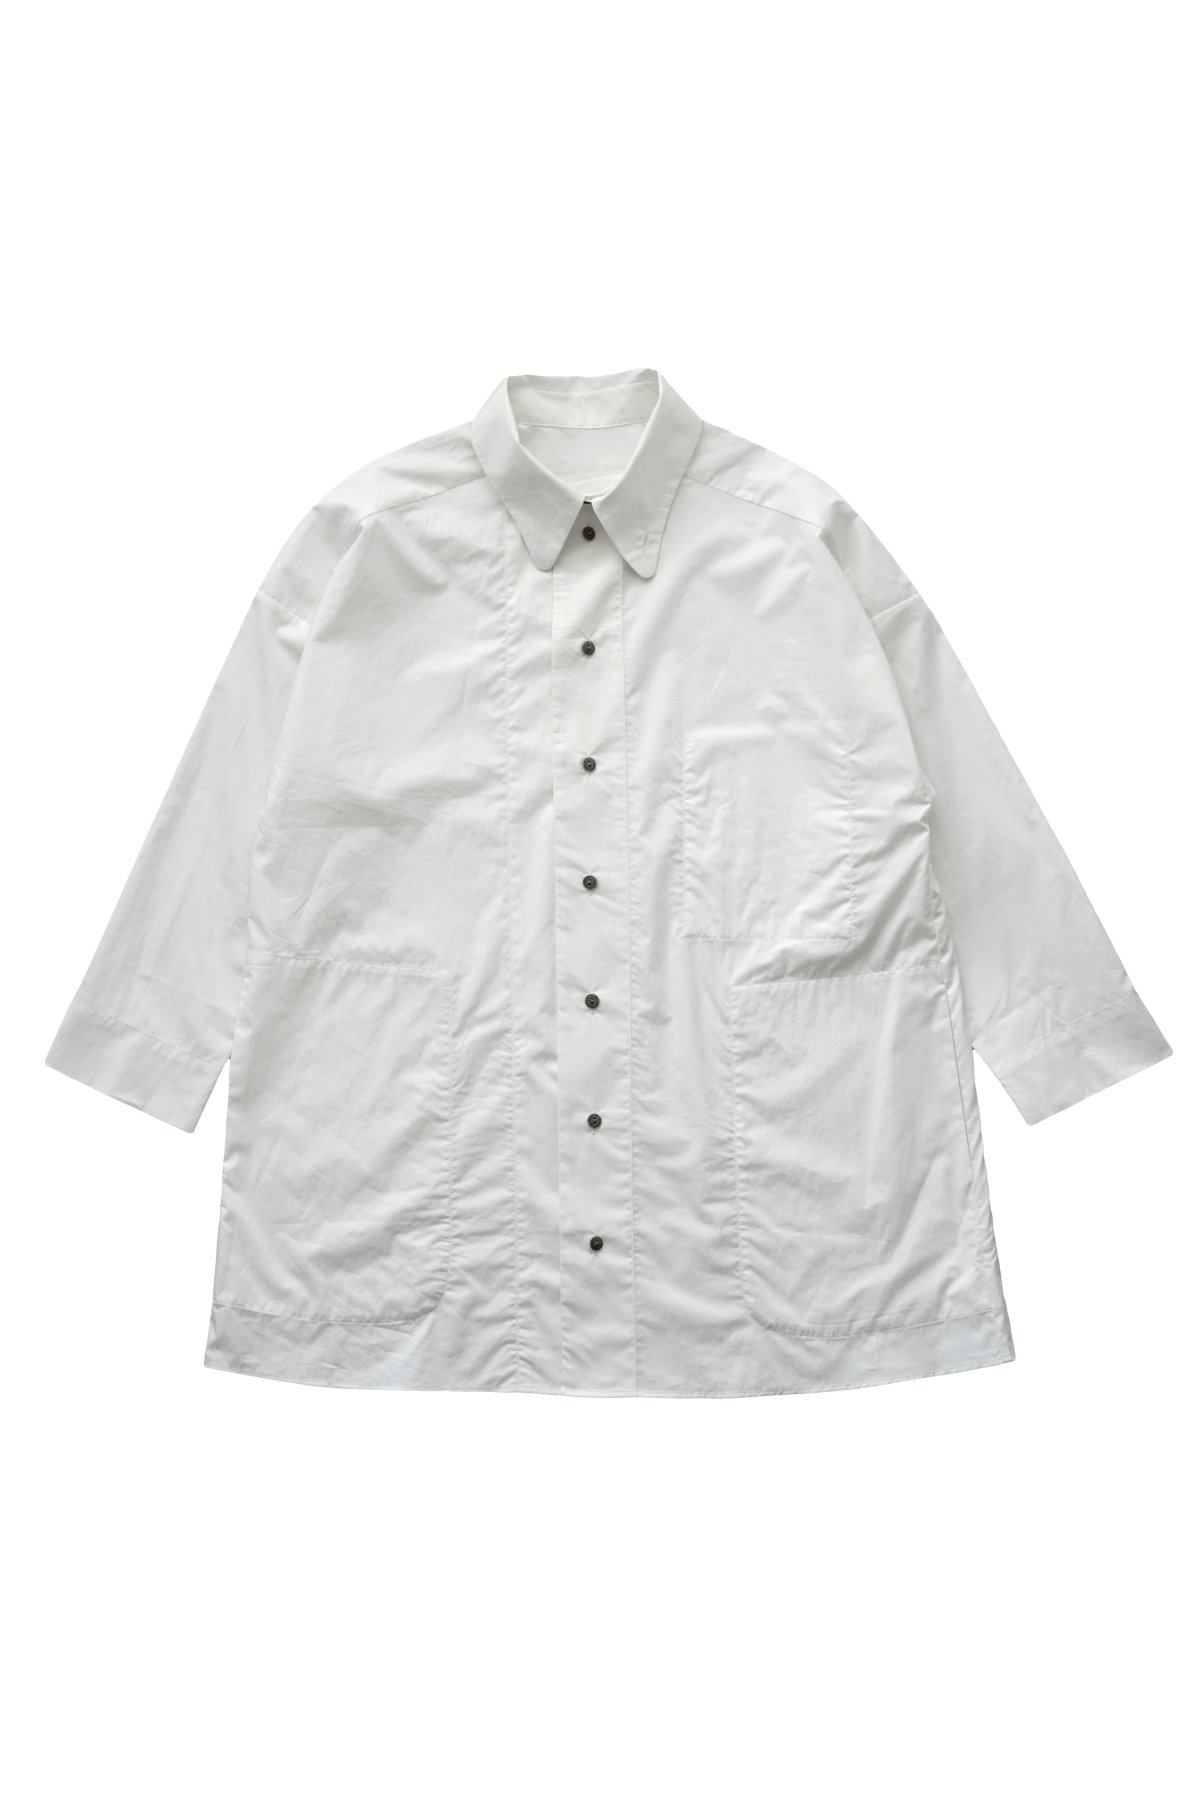 toogood 通販 正規店 フェートン - Phaeton Smart Clothes Online Store